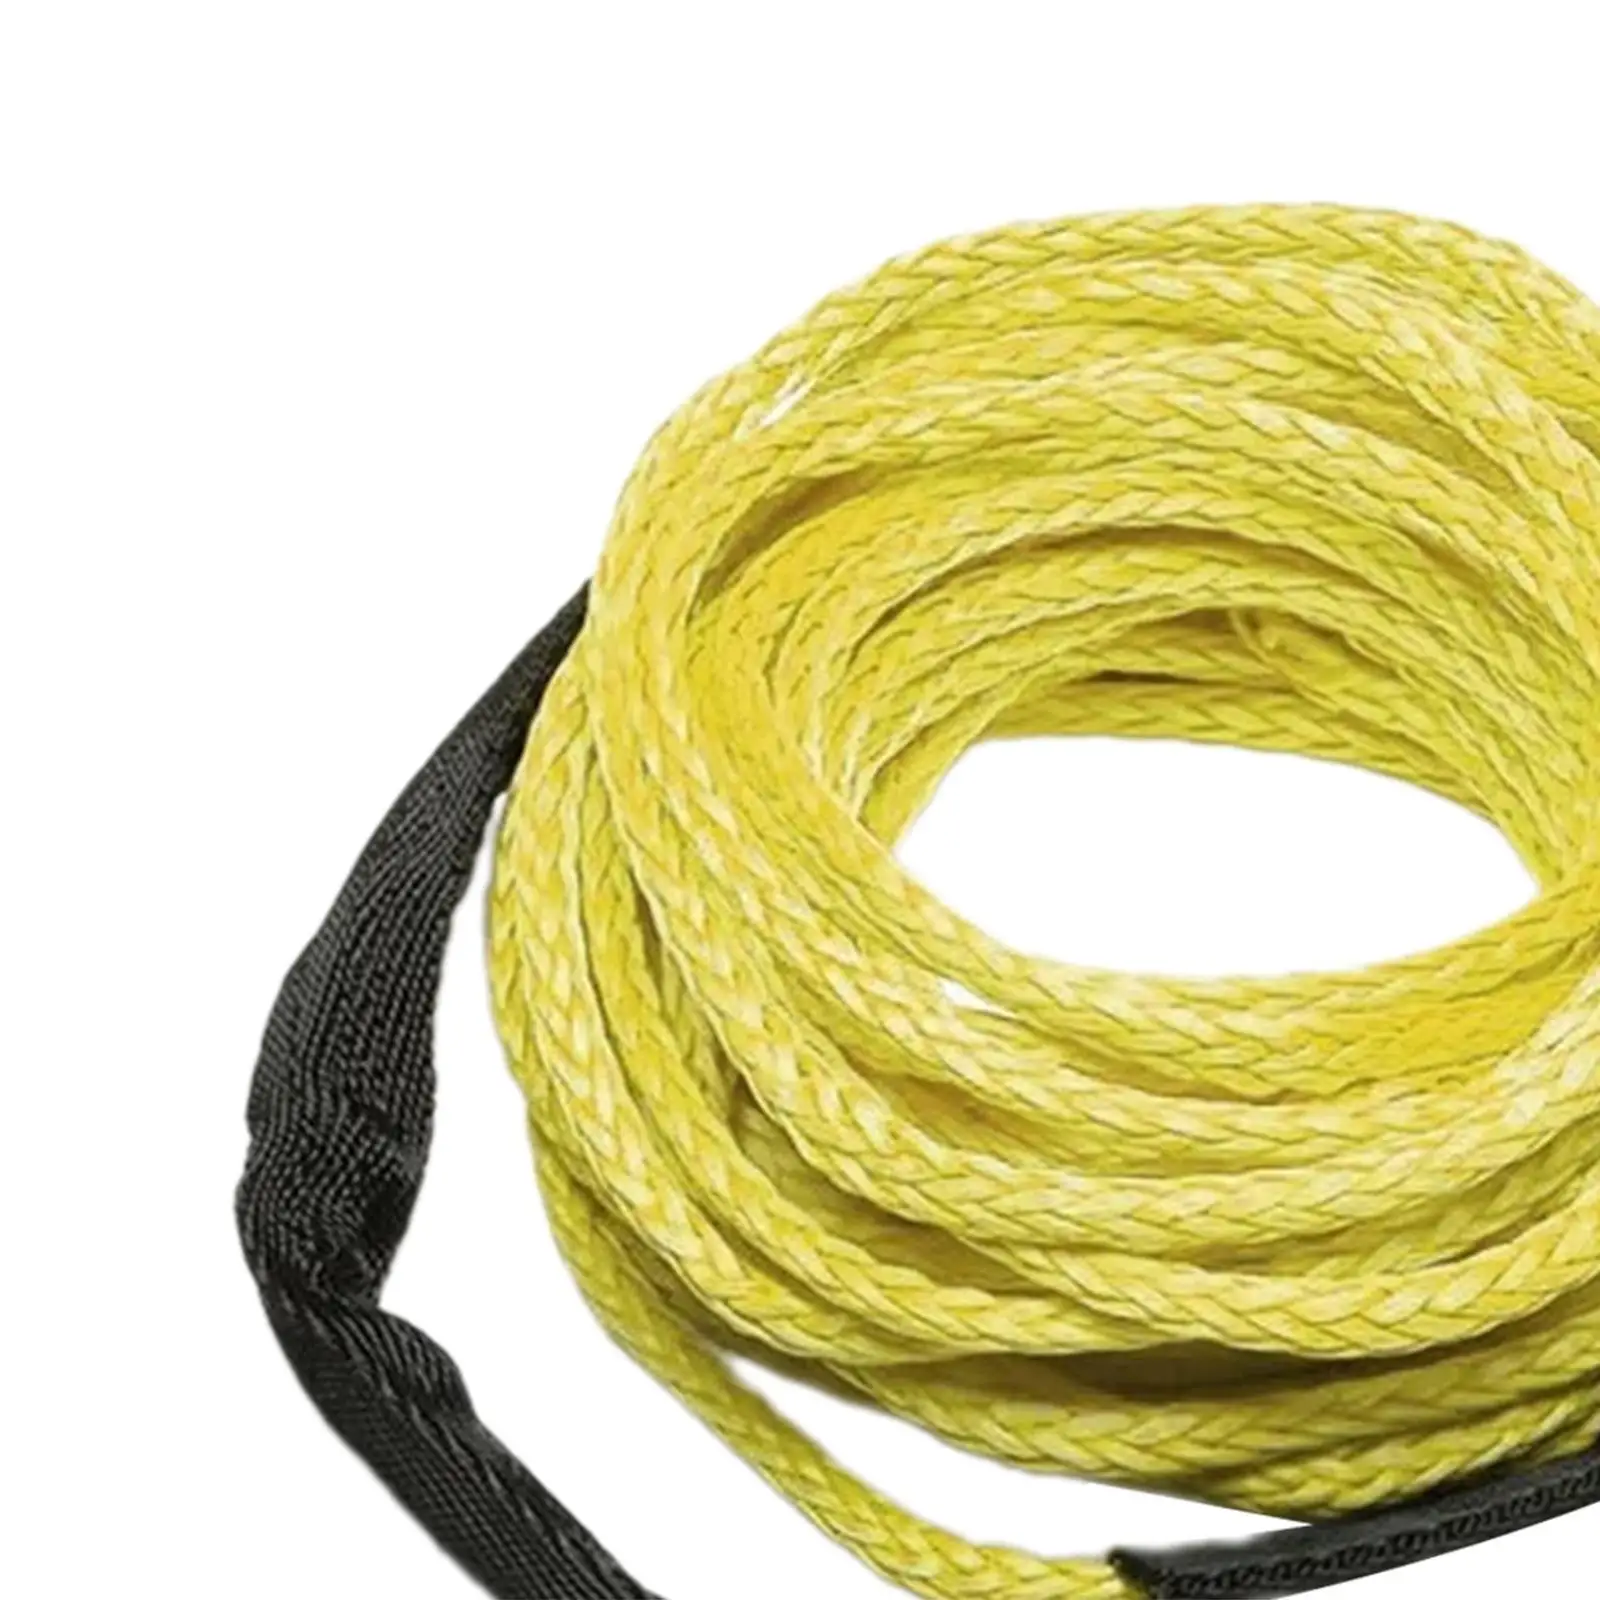 Synthetic Winch Rope Car Tow Strap 1/4 inch x 49 Feet 7700lbs with Sheath Winch Cable Towing Rope for Truck Vehicle ATV